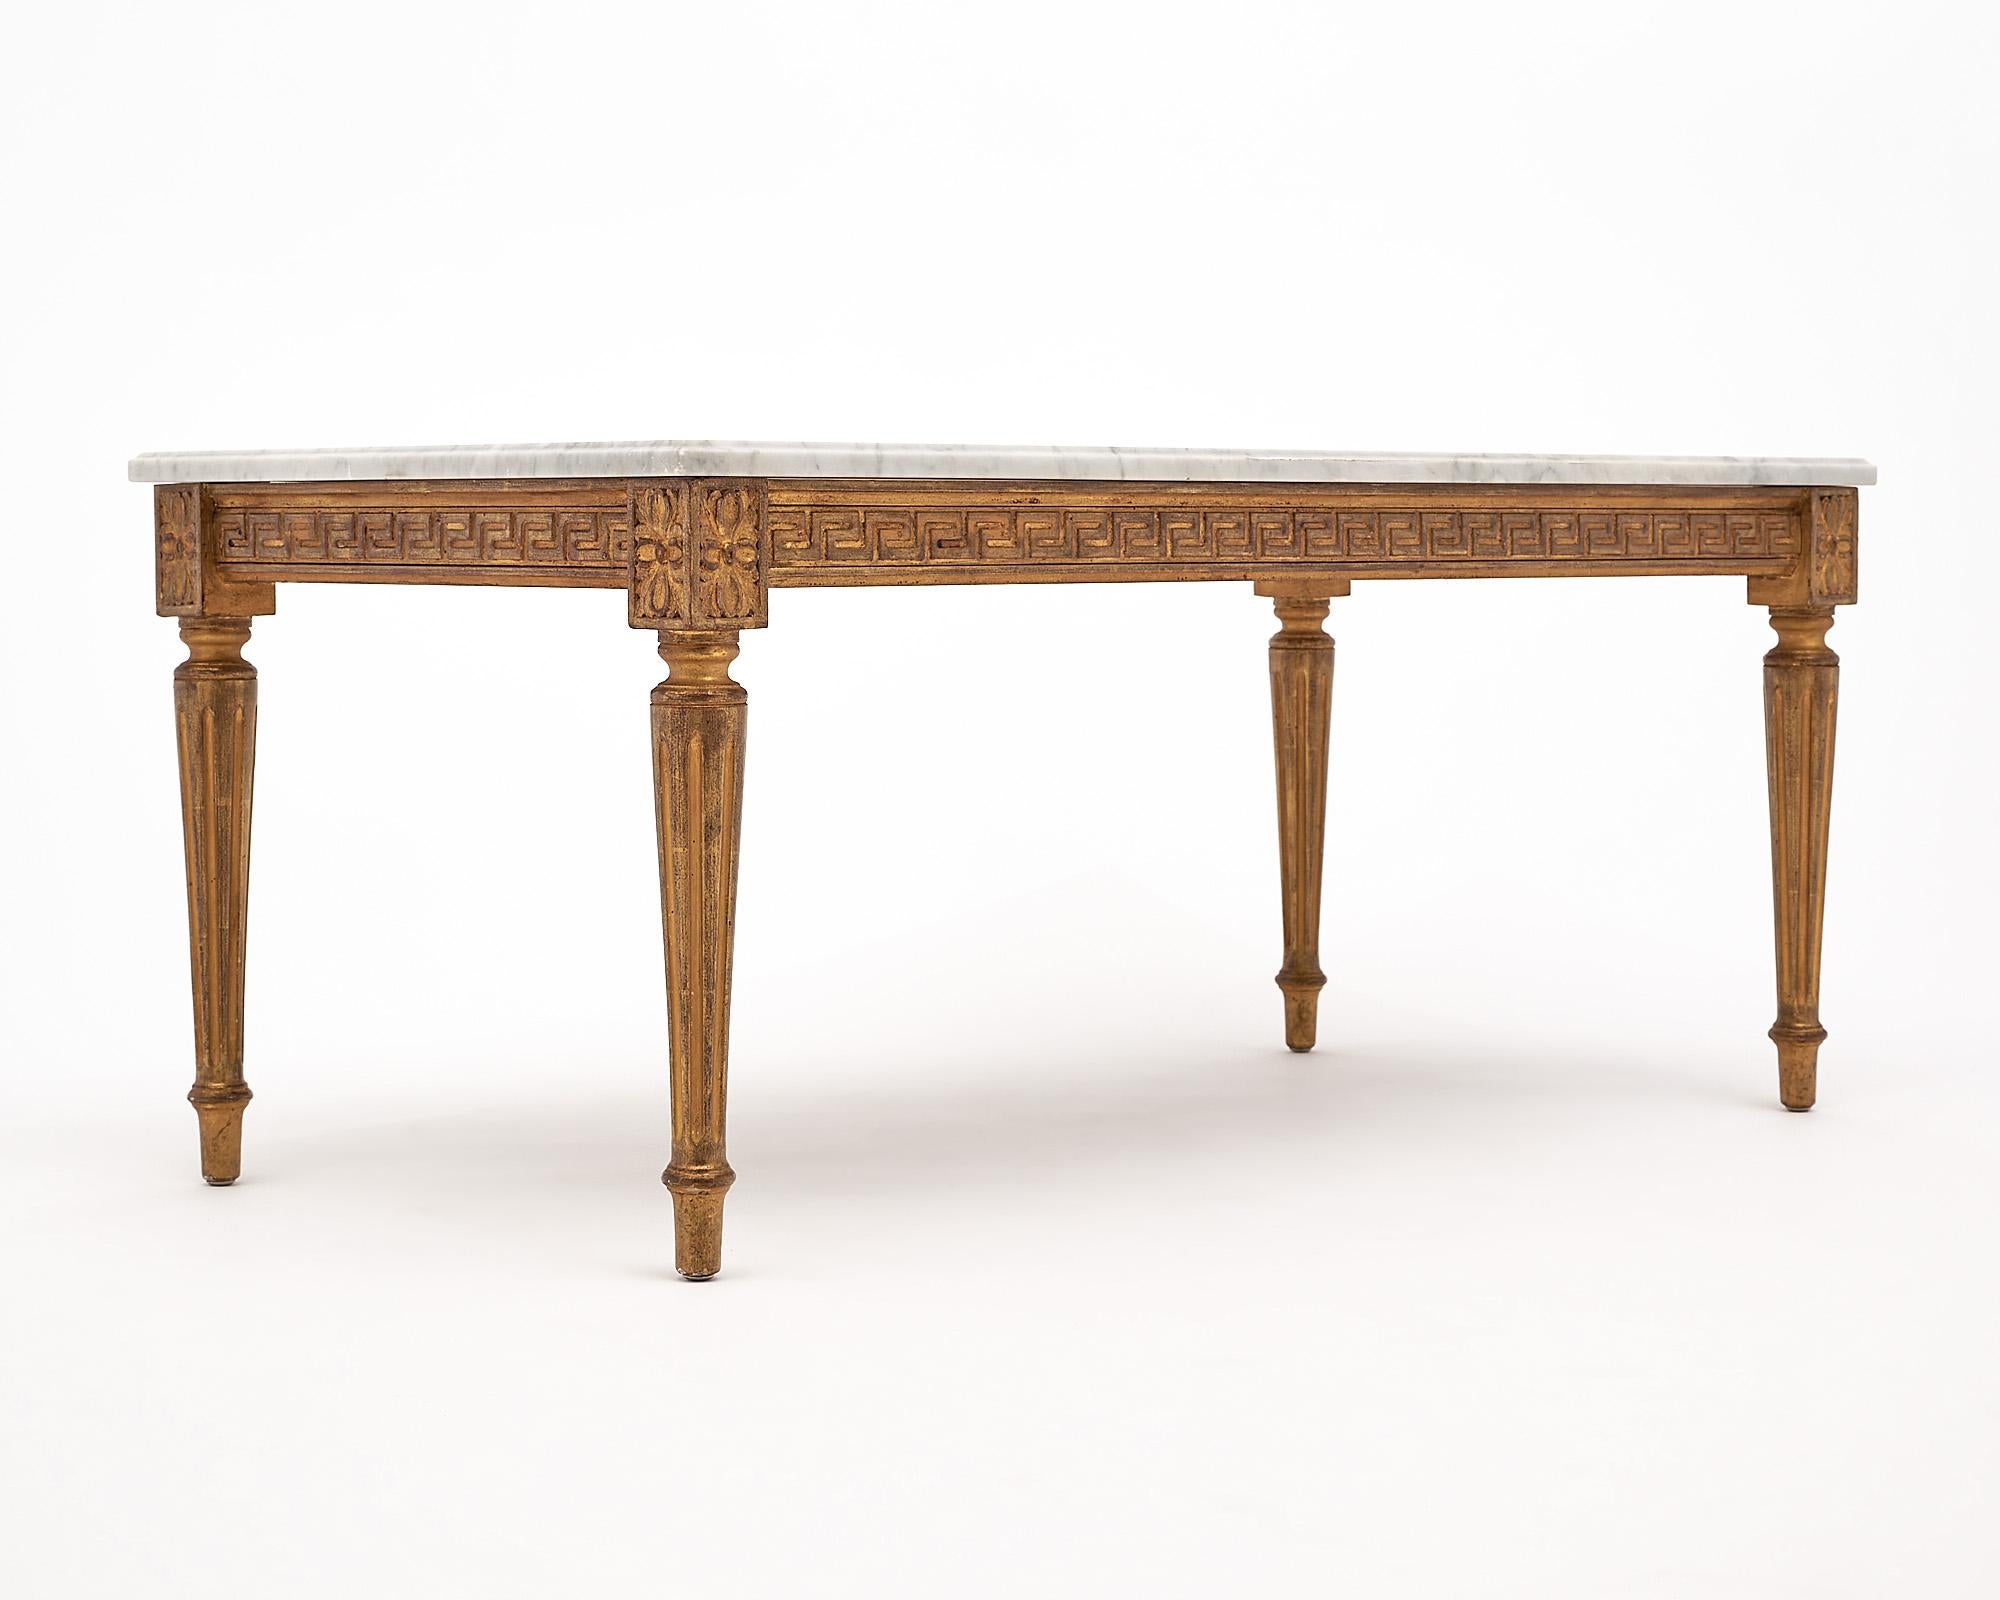 Coffee table, French, in the Louis XVI style. This piece is made of hand carved wood with a Greek key design frieze on the apron. The legs are tapered and fluted. The base has 24 carat gold leafing throughout. This neoclassical table is topped with